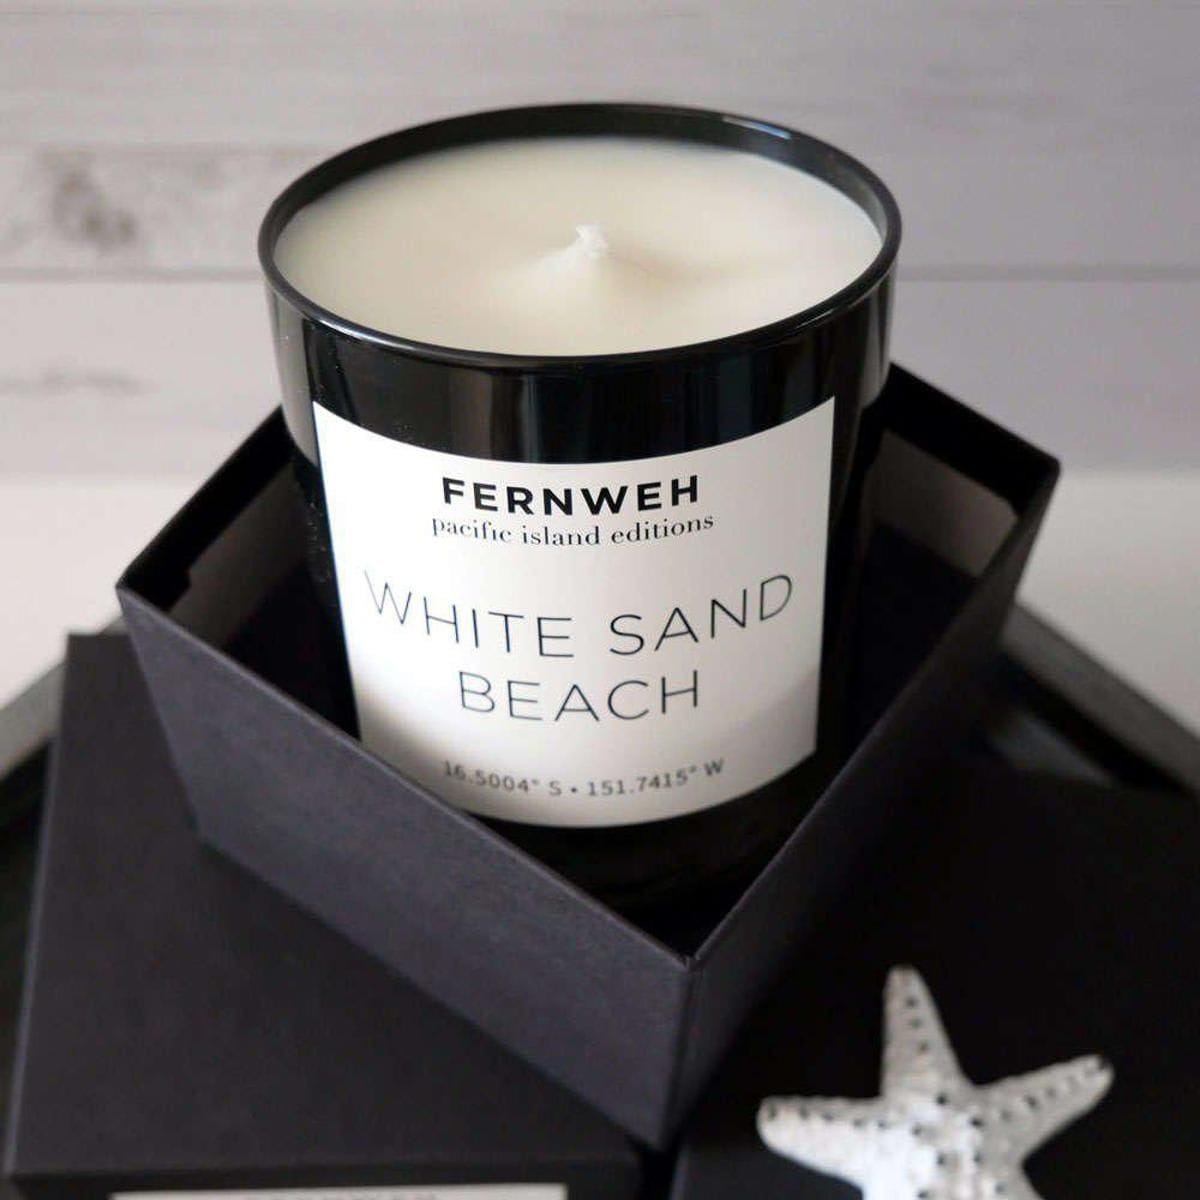 White Sand Beach Candle: Pacific Islands Editions by Fernweh